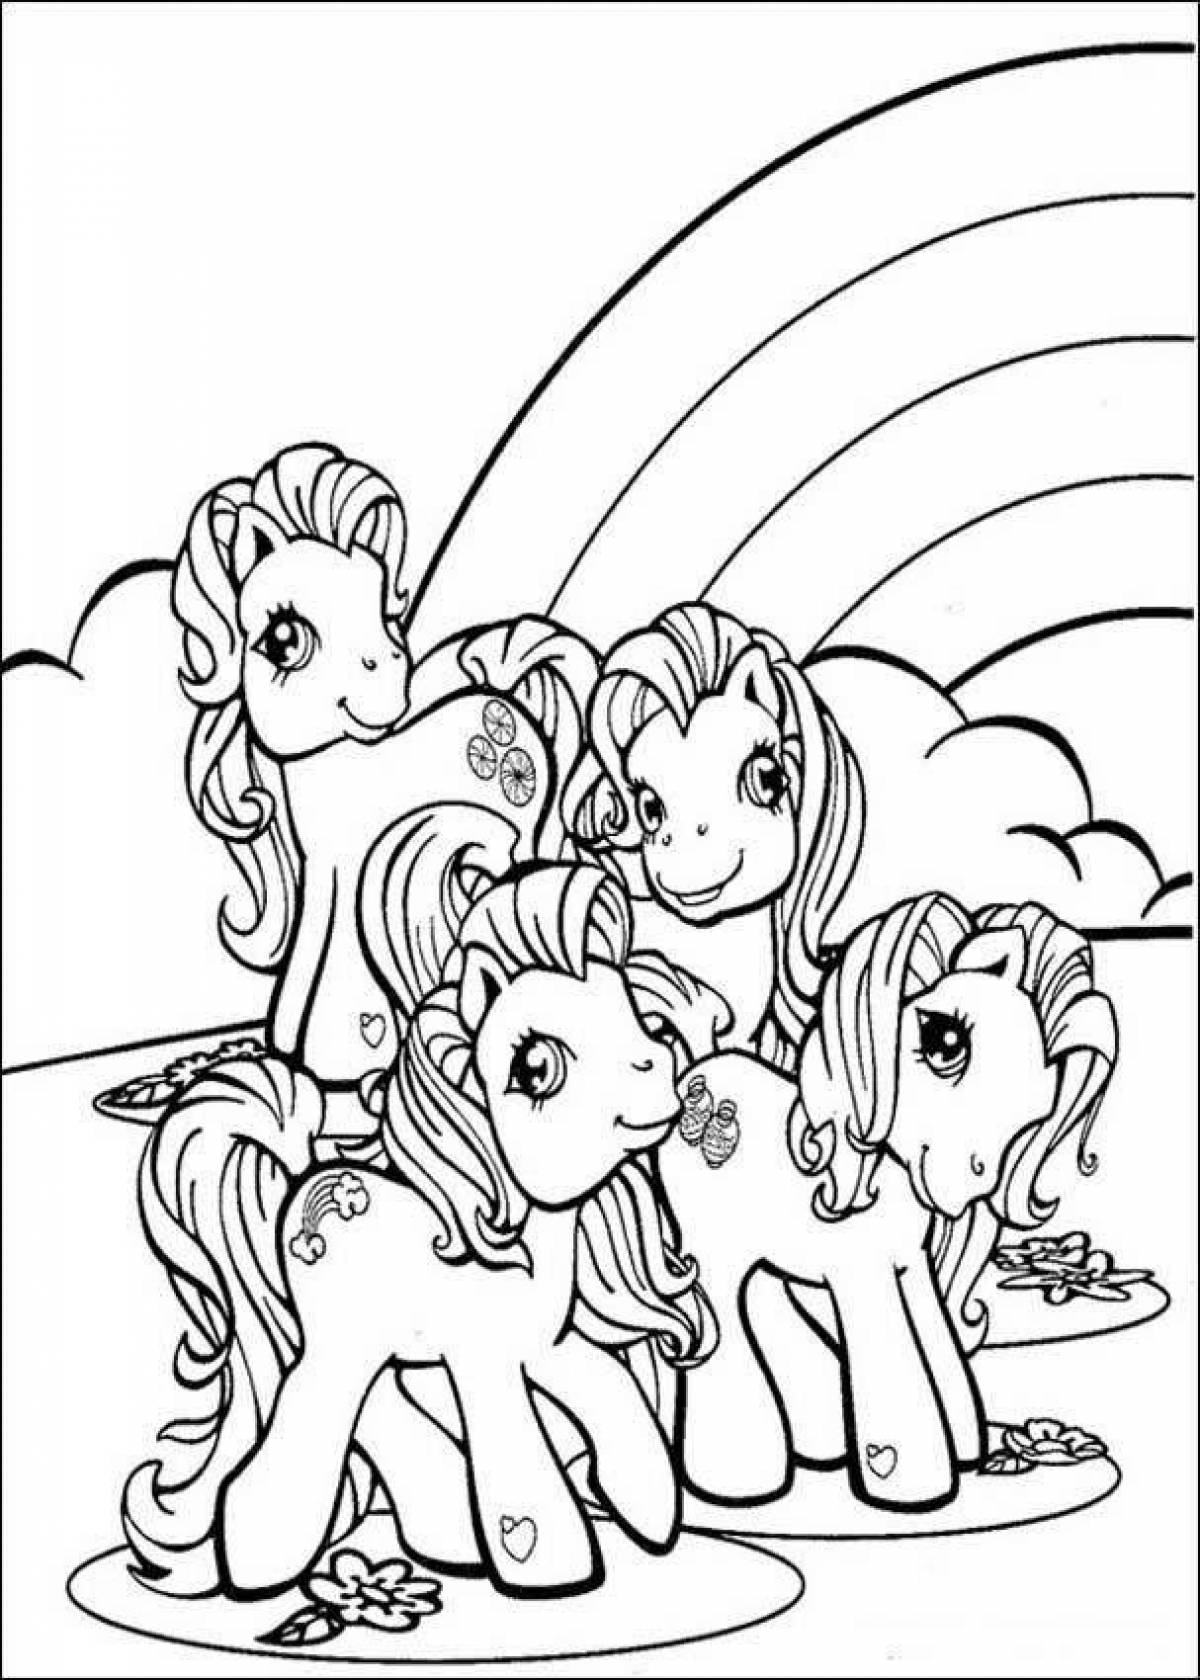 Coloring page magic rainbow friends